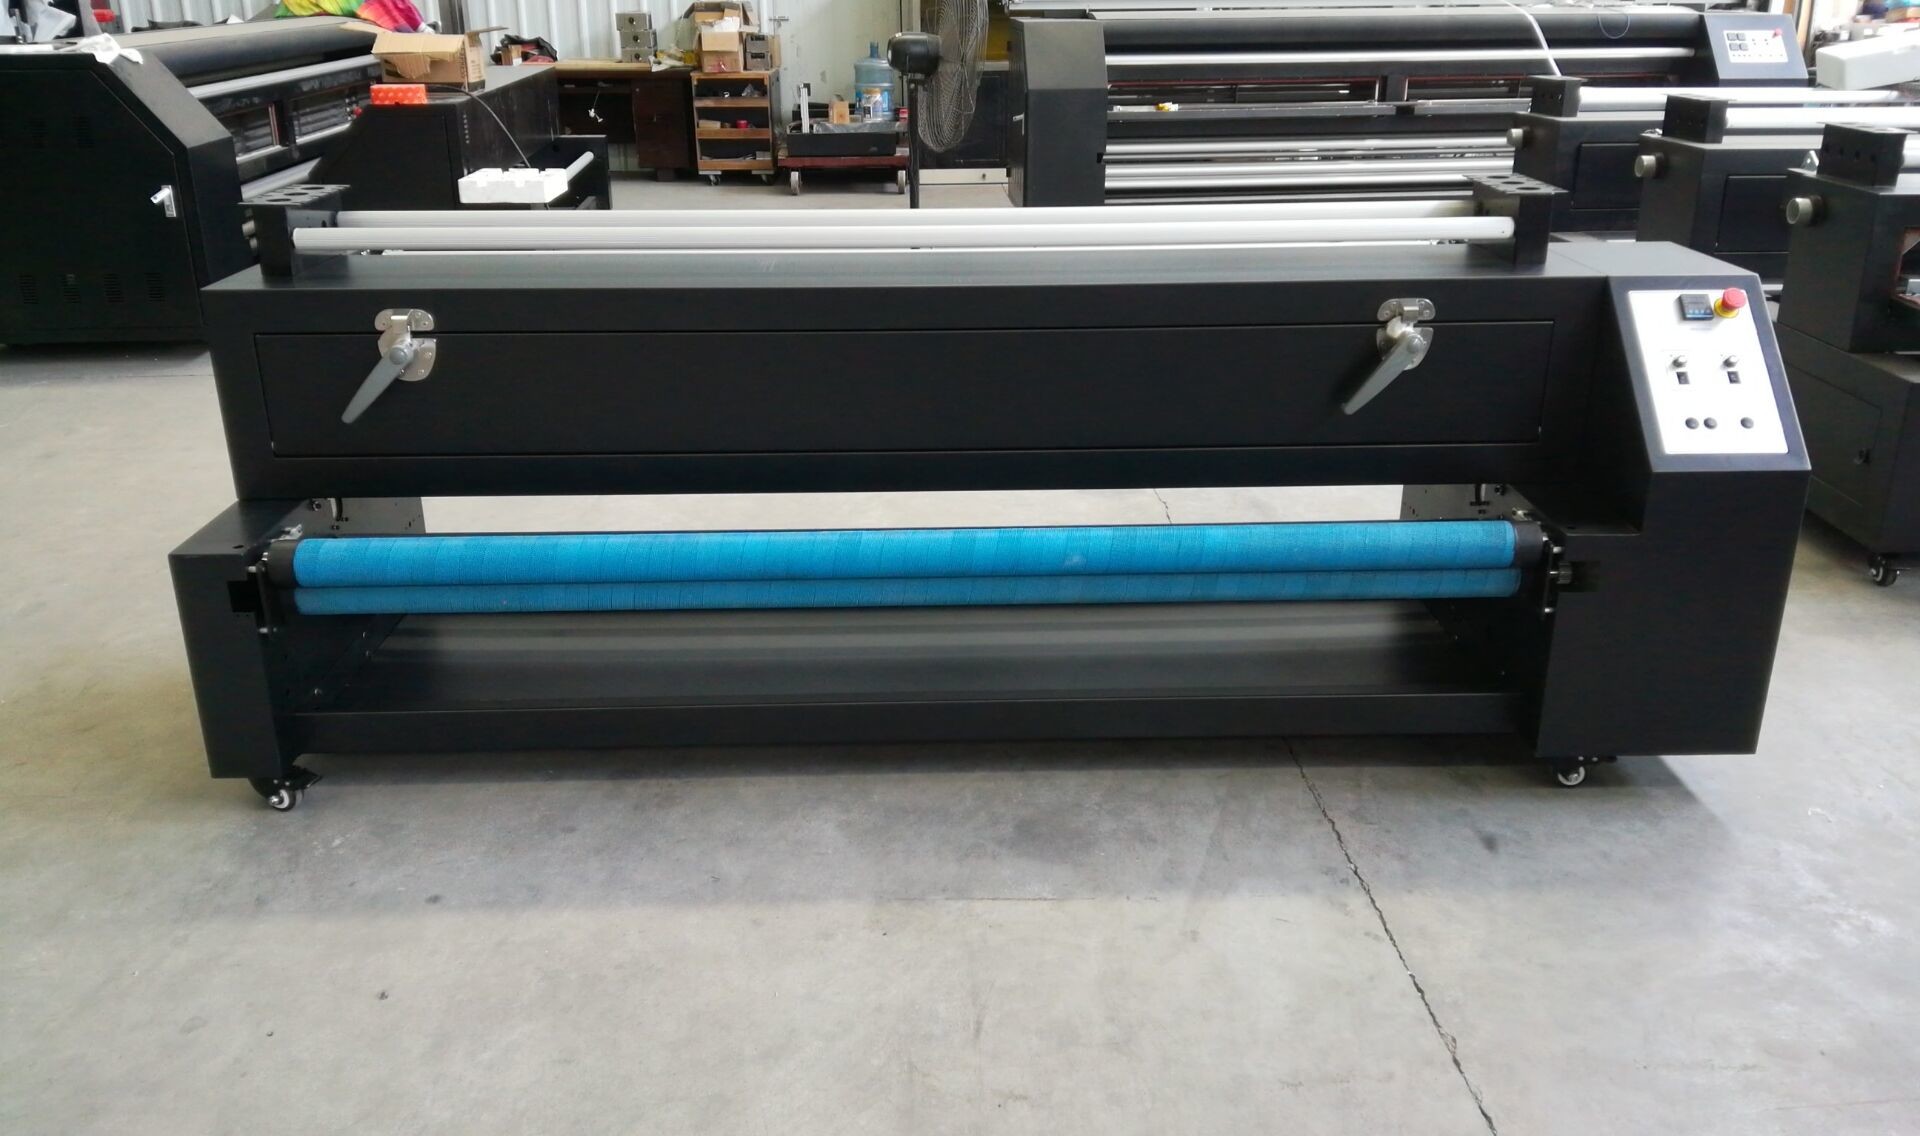  Automatic Dye Sublimation Printer With Fast Speed 100 M / Hour For Textile Manufactures